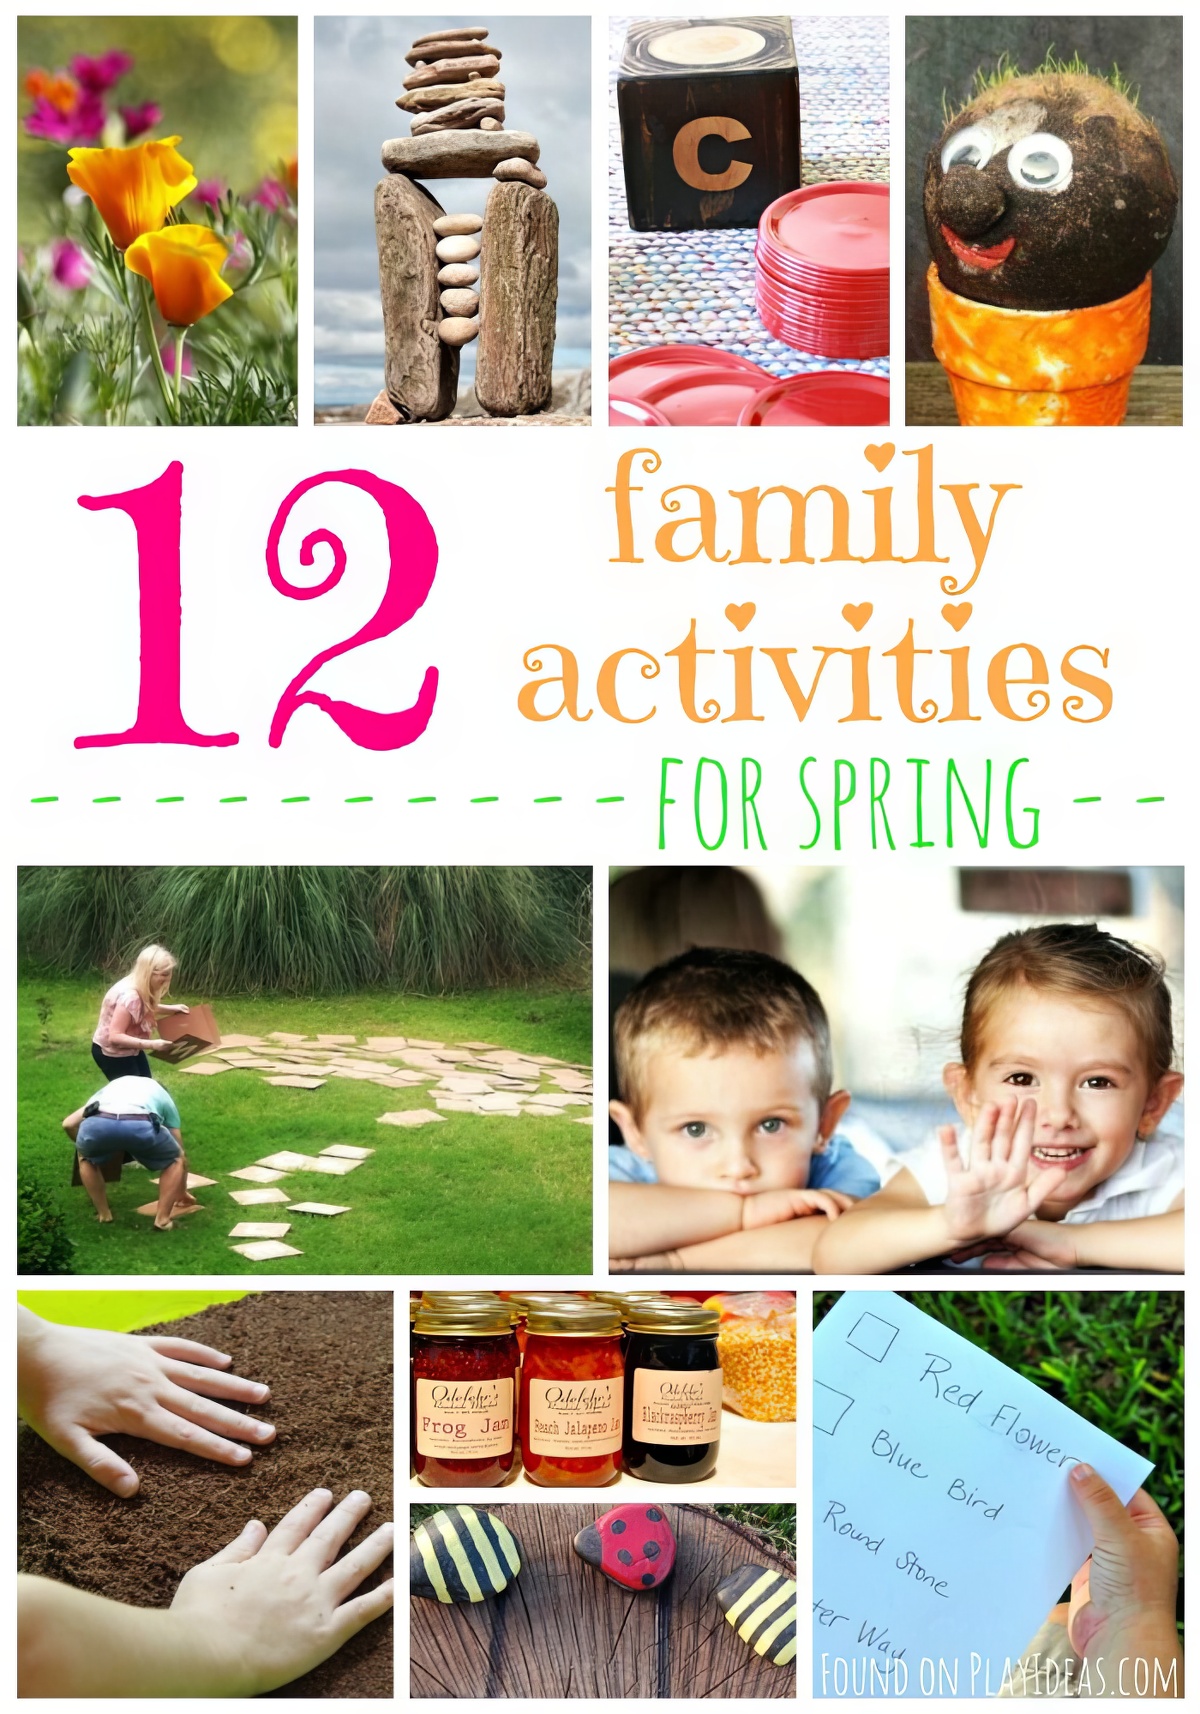 Family Activities for Spring, fun family spring activities, activities in spring